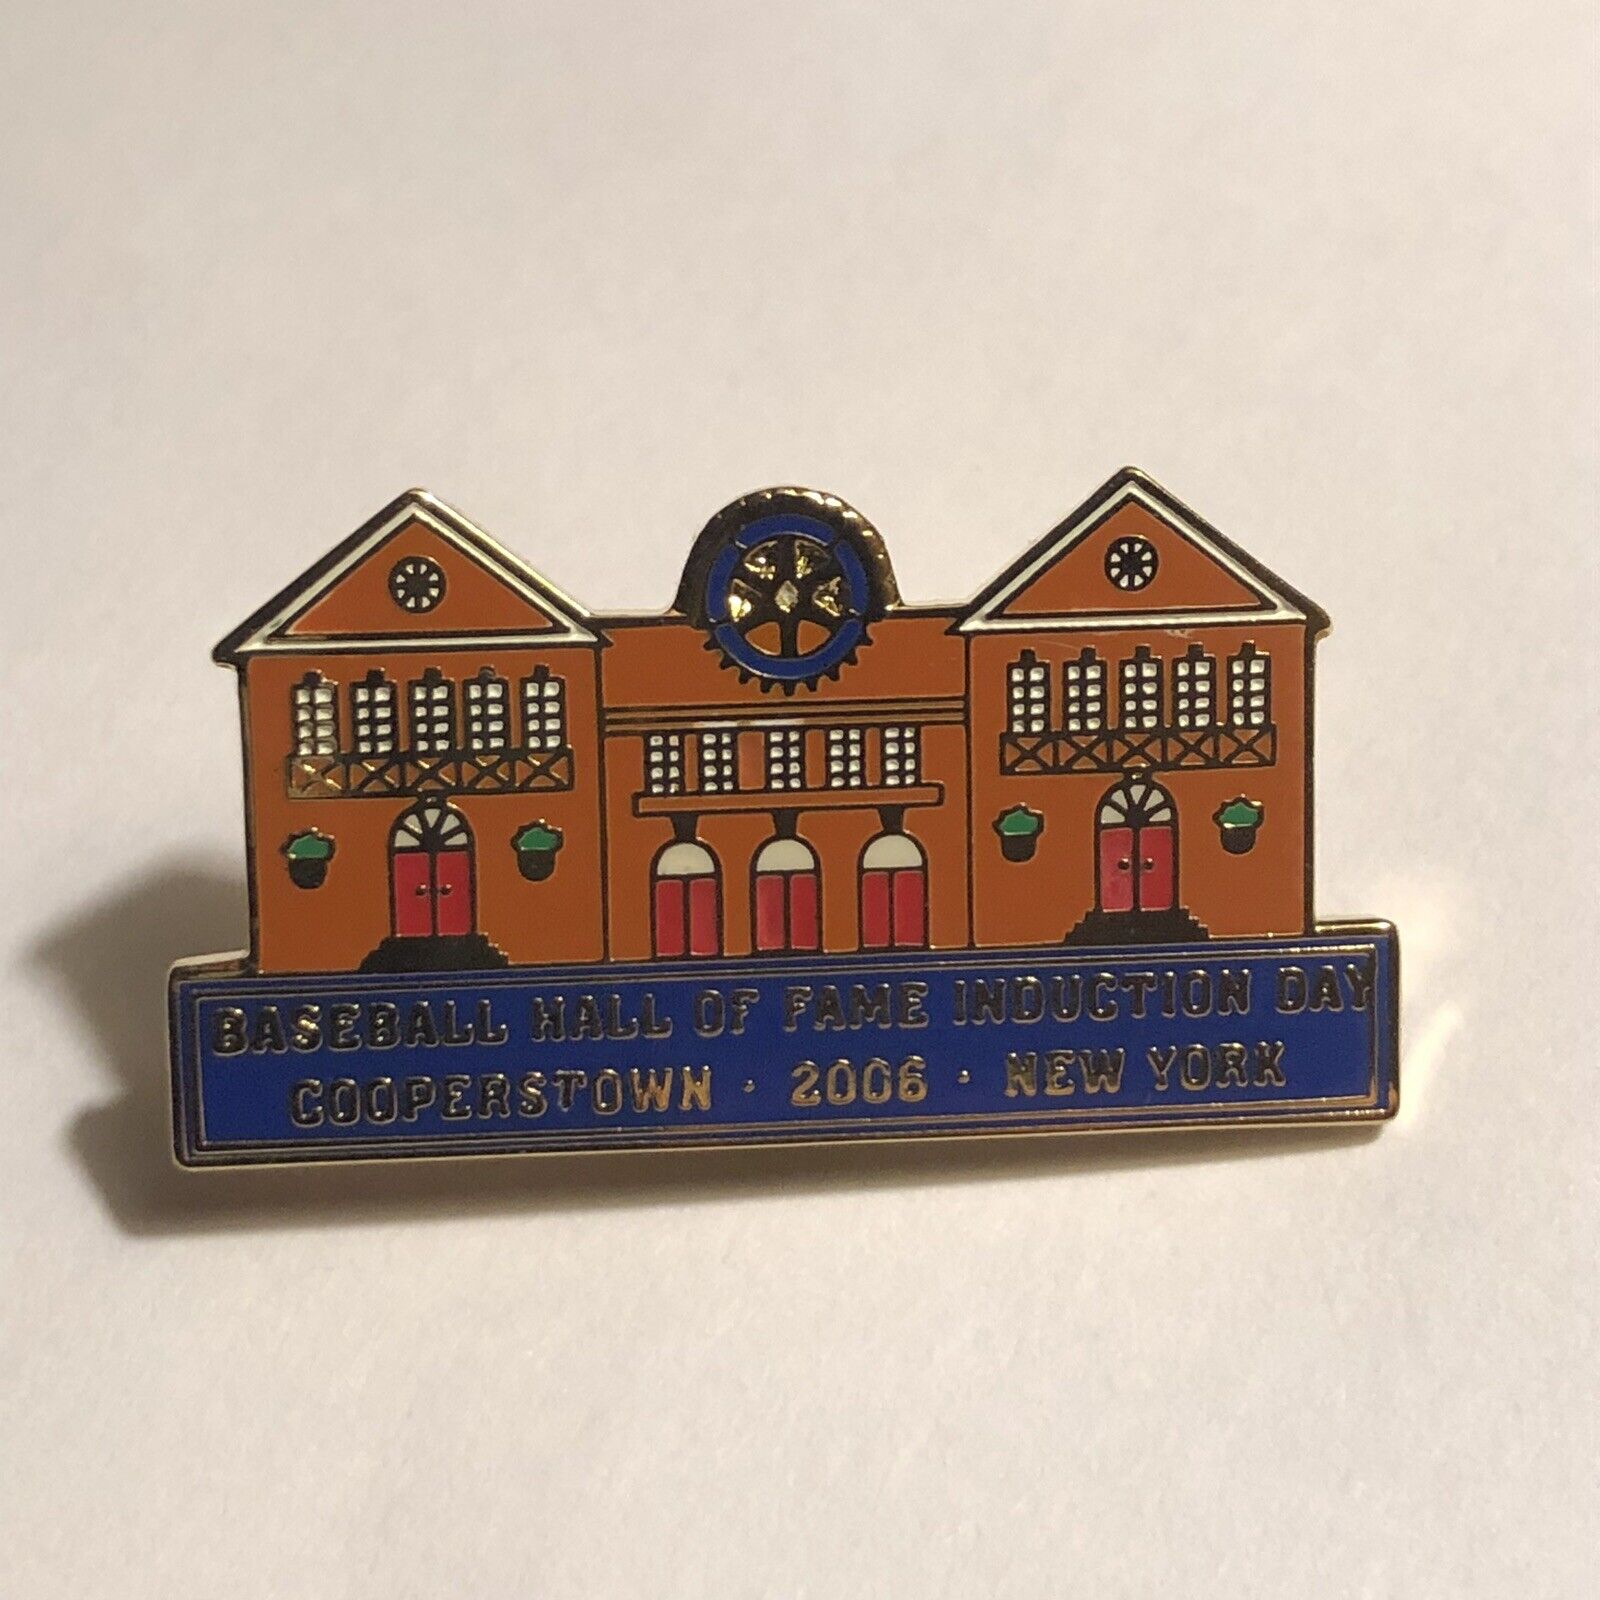 2006 Baseball Hall Of Fame Museum - Induction Day Pin Cooperstown